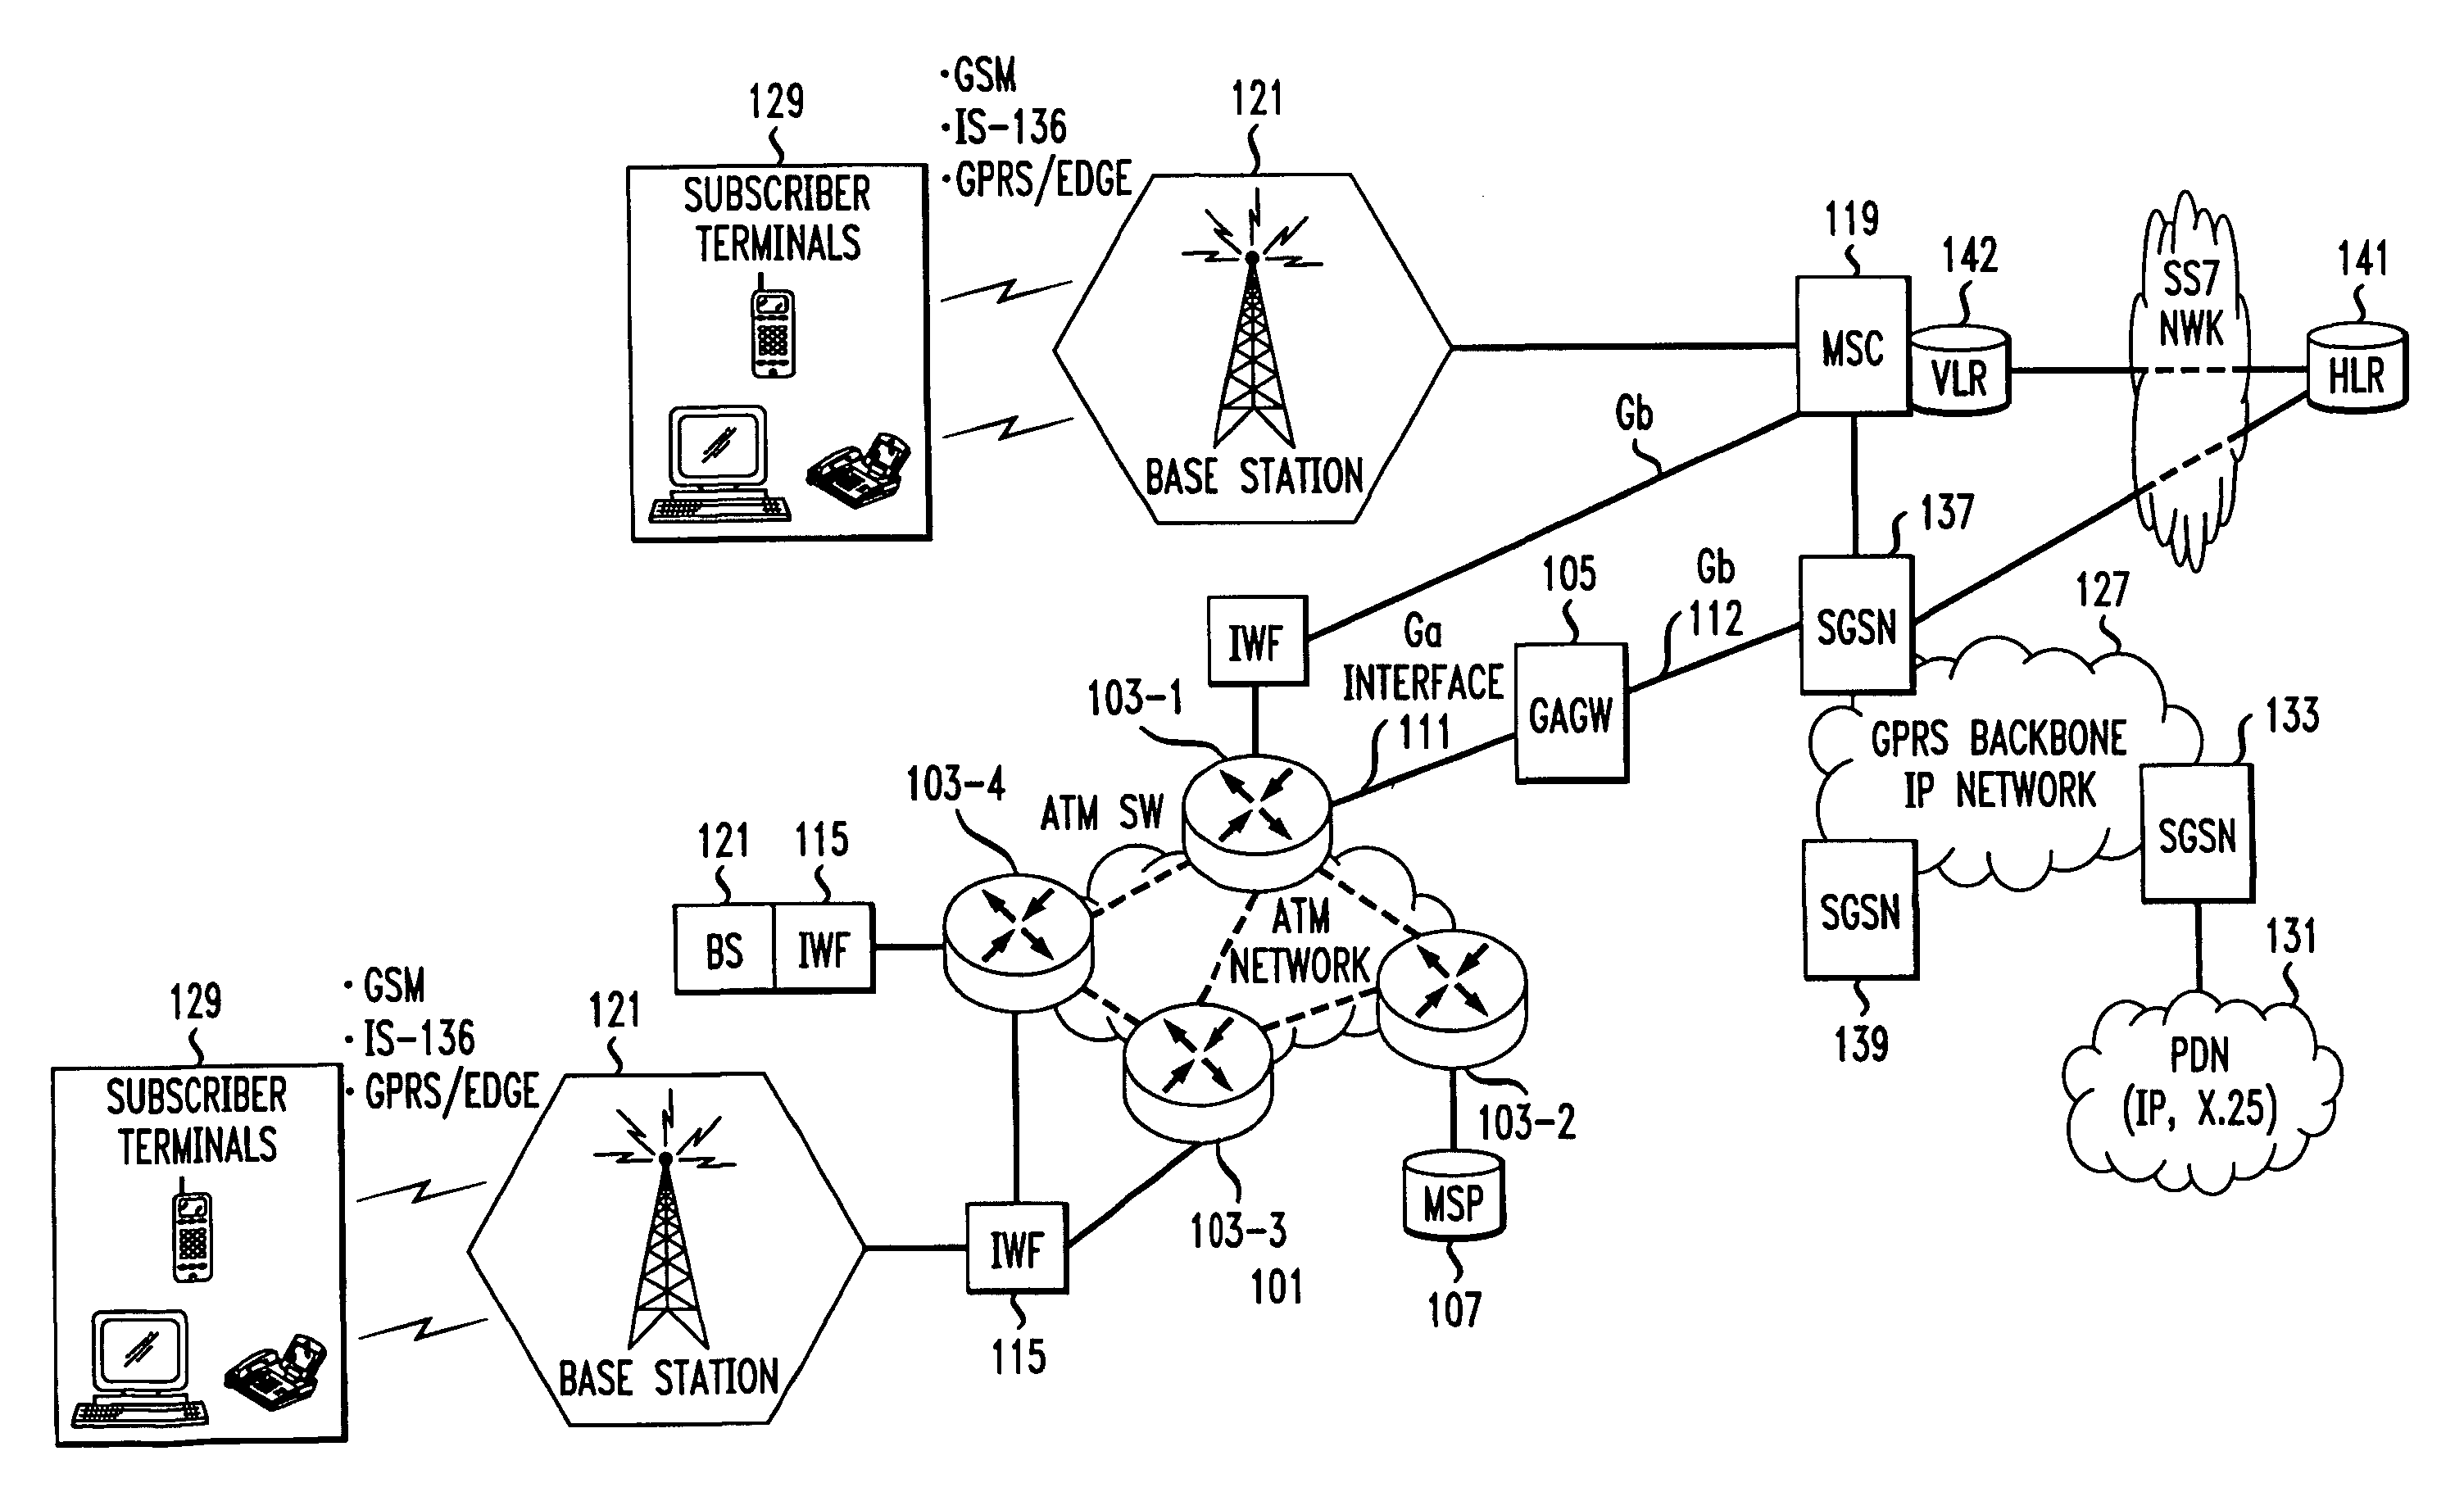 Method for integrating wired and wireless packet/cell networking via ATM